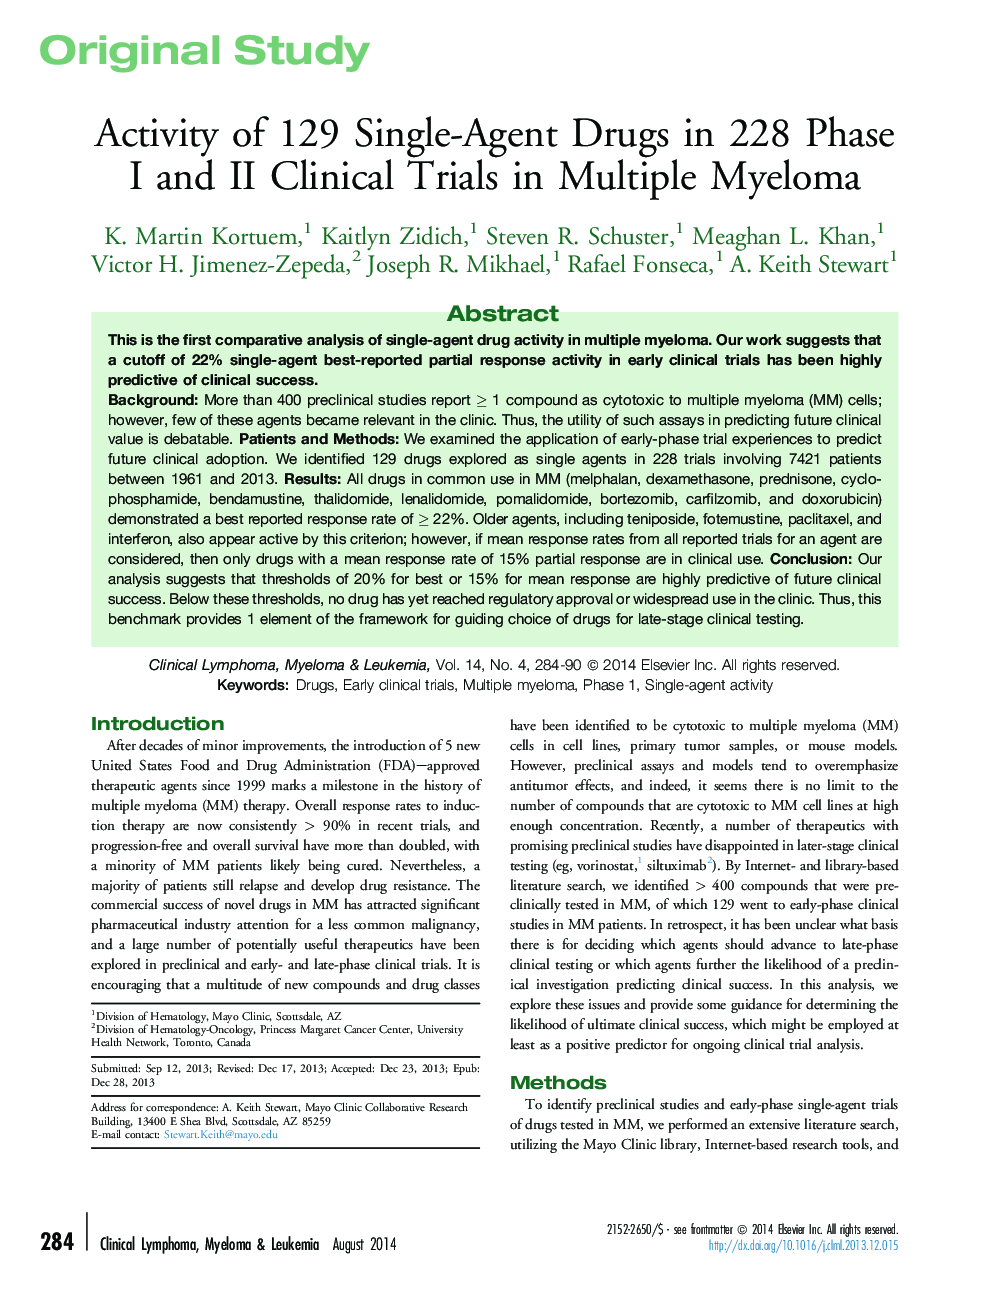 Original StudyActivity of 129 Single-Agent Drugs in 228 Phase I and II Clinical Trials in Multiple Myeloma